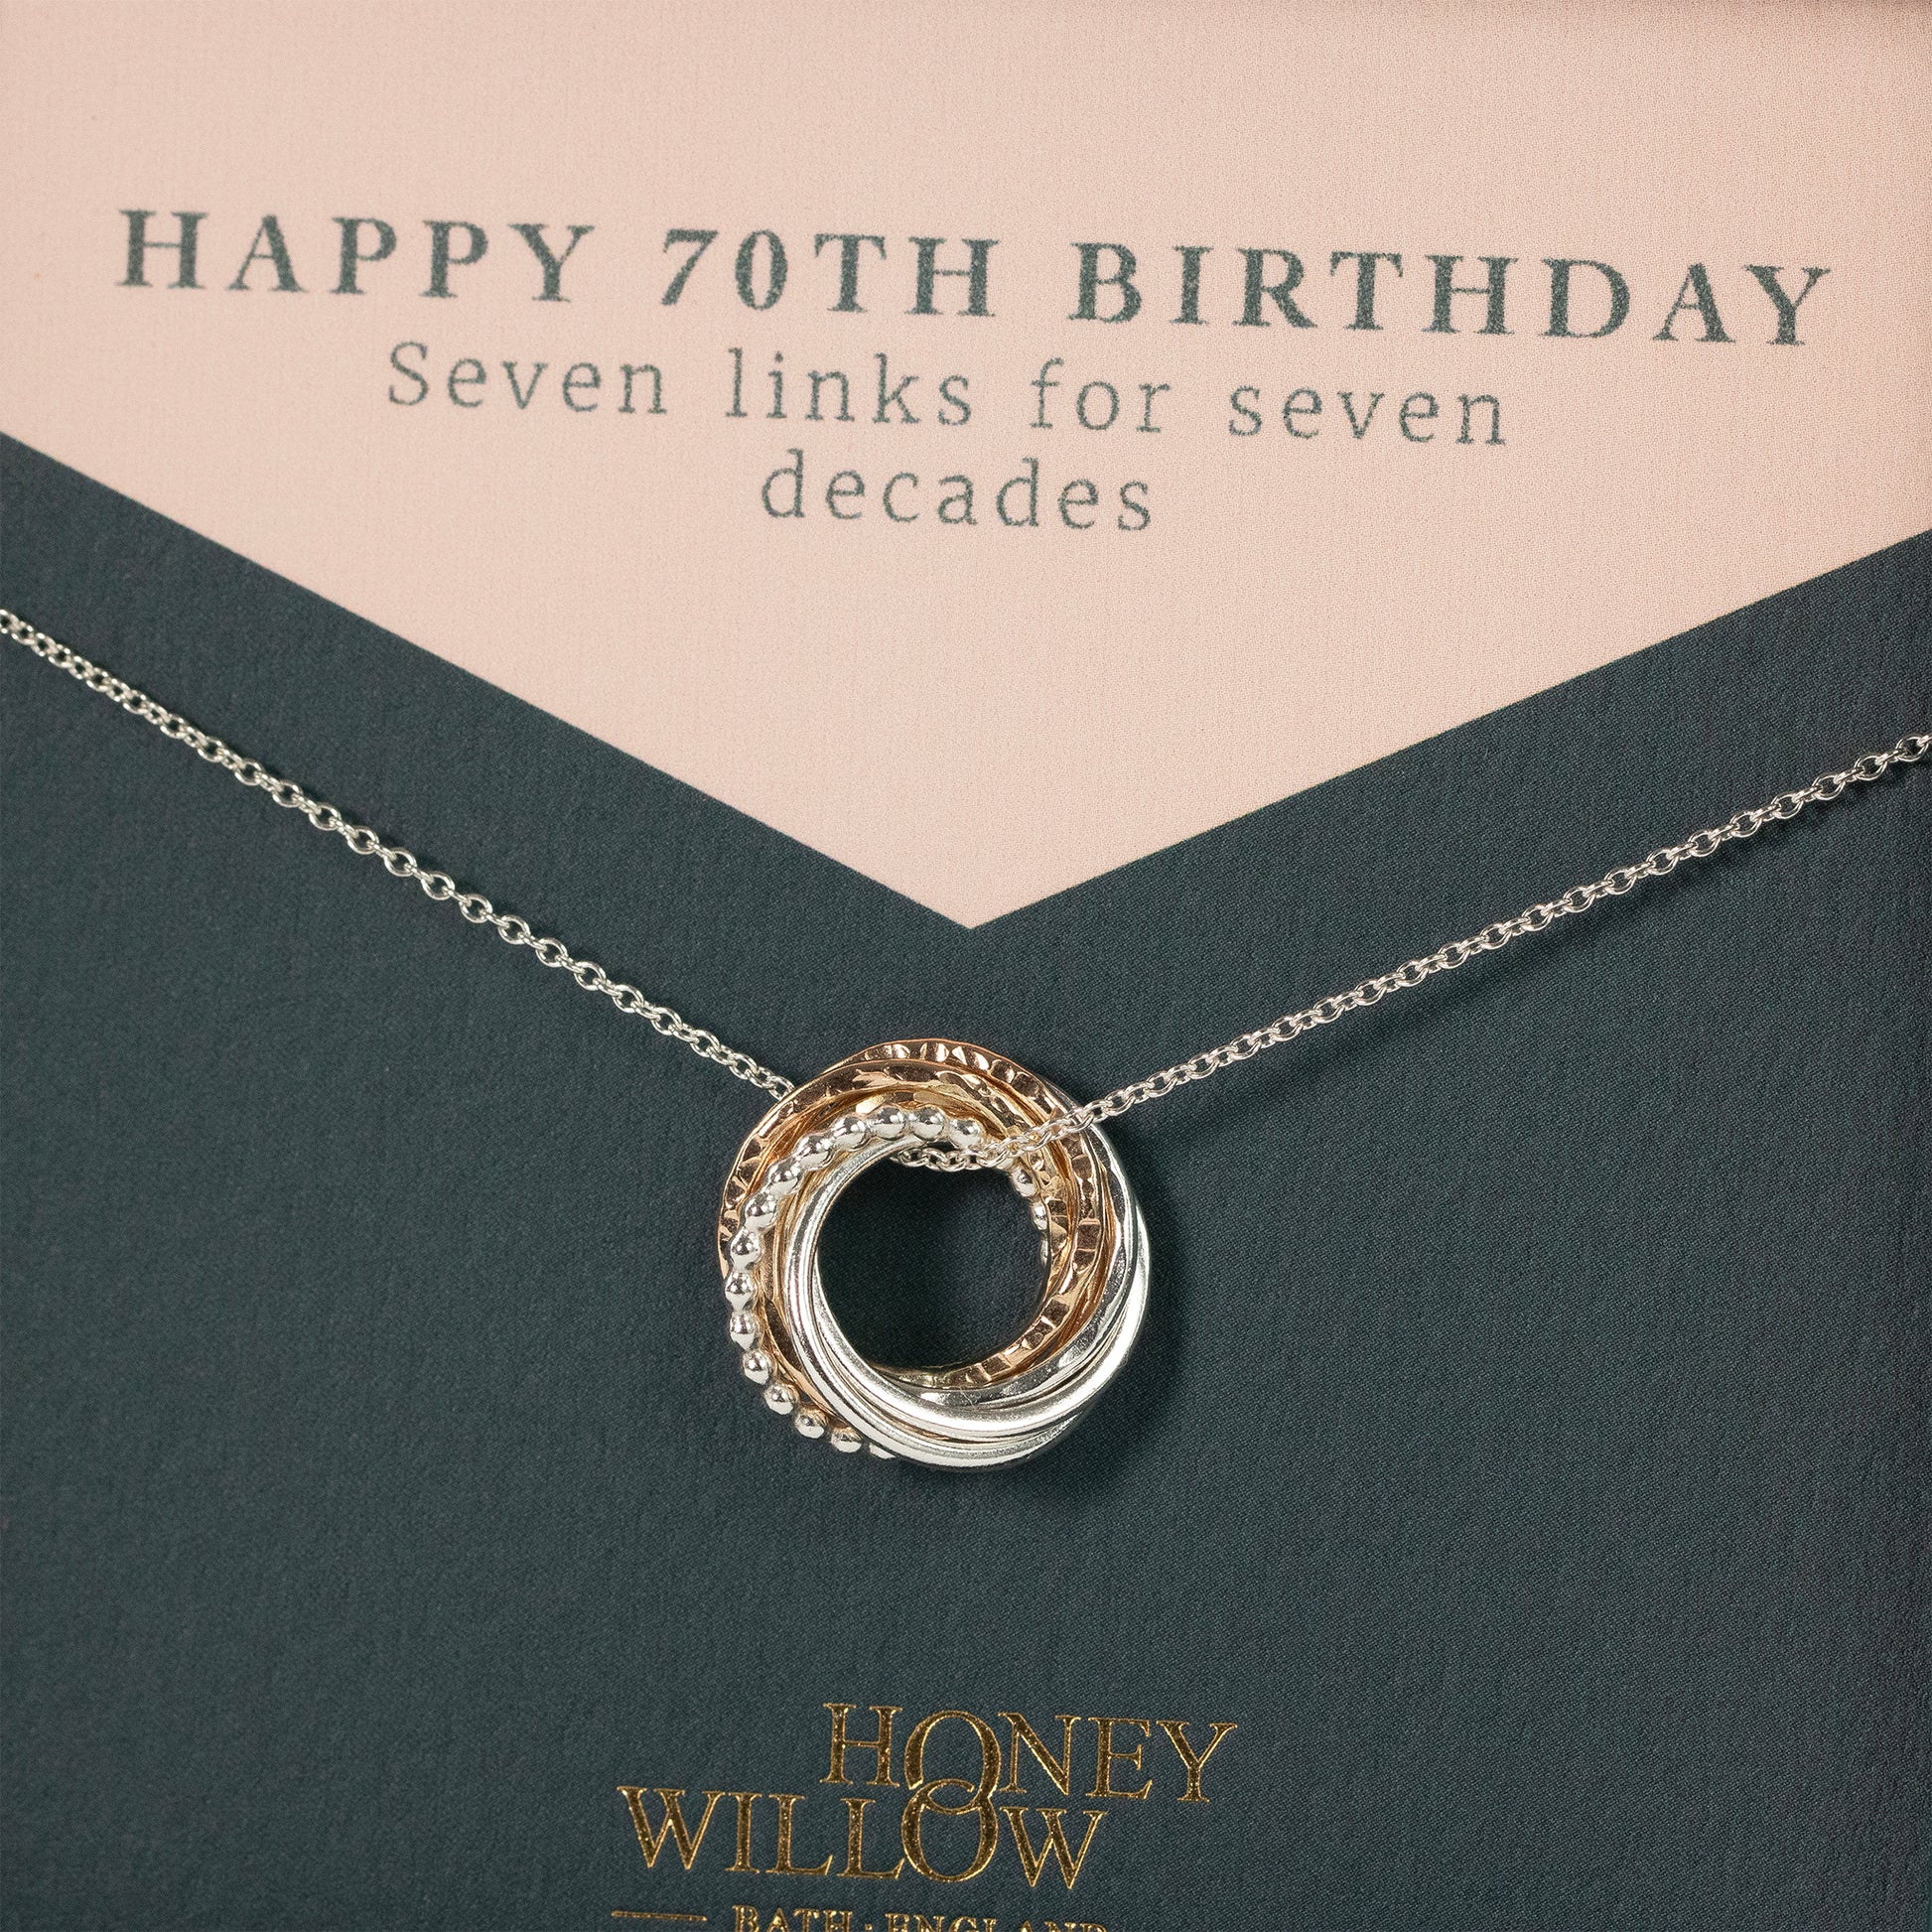 70th Birthday Necklace - The Original 7 Links for 7 Decades Necklace - Petite Silver & Gold